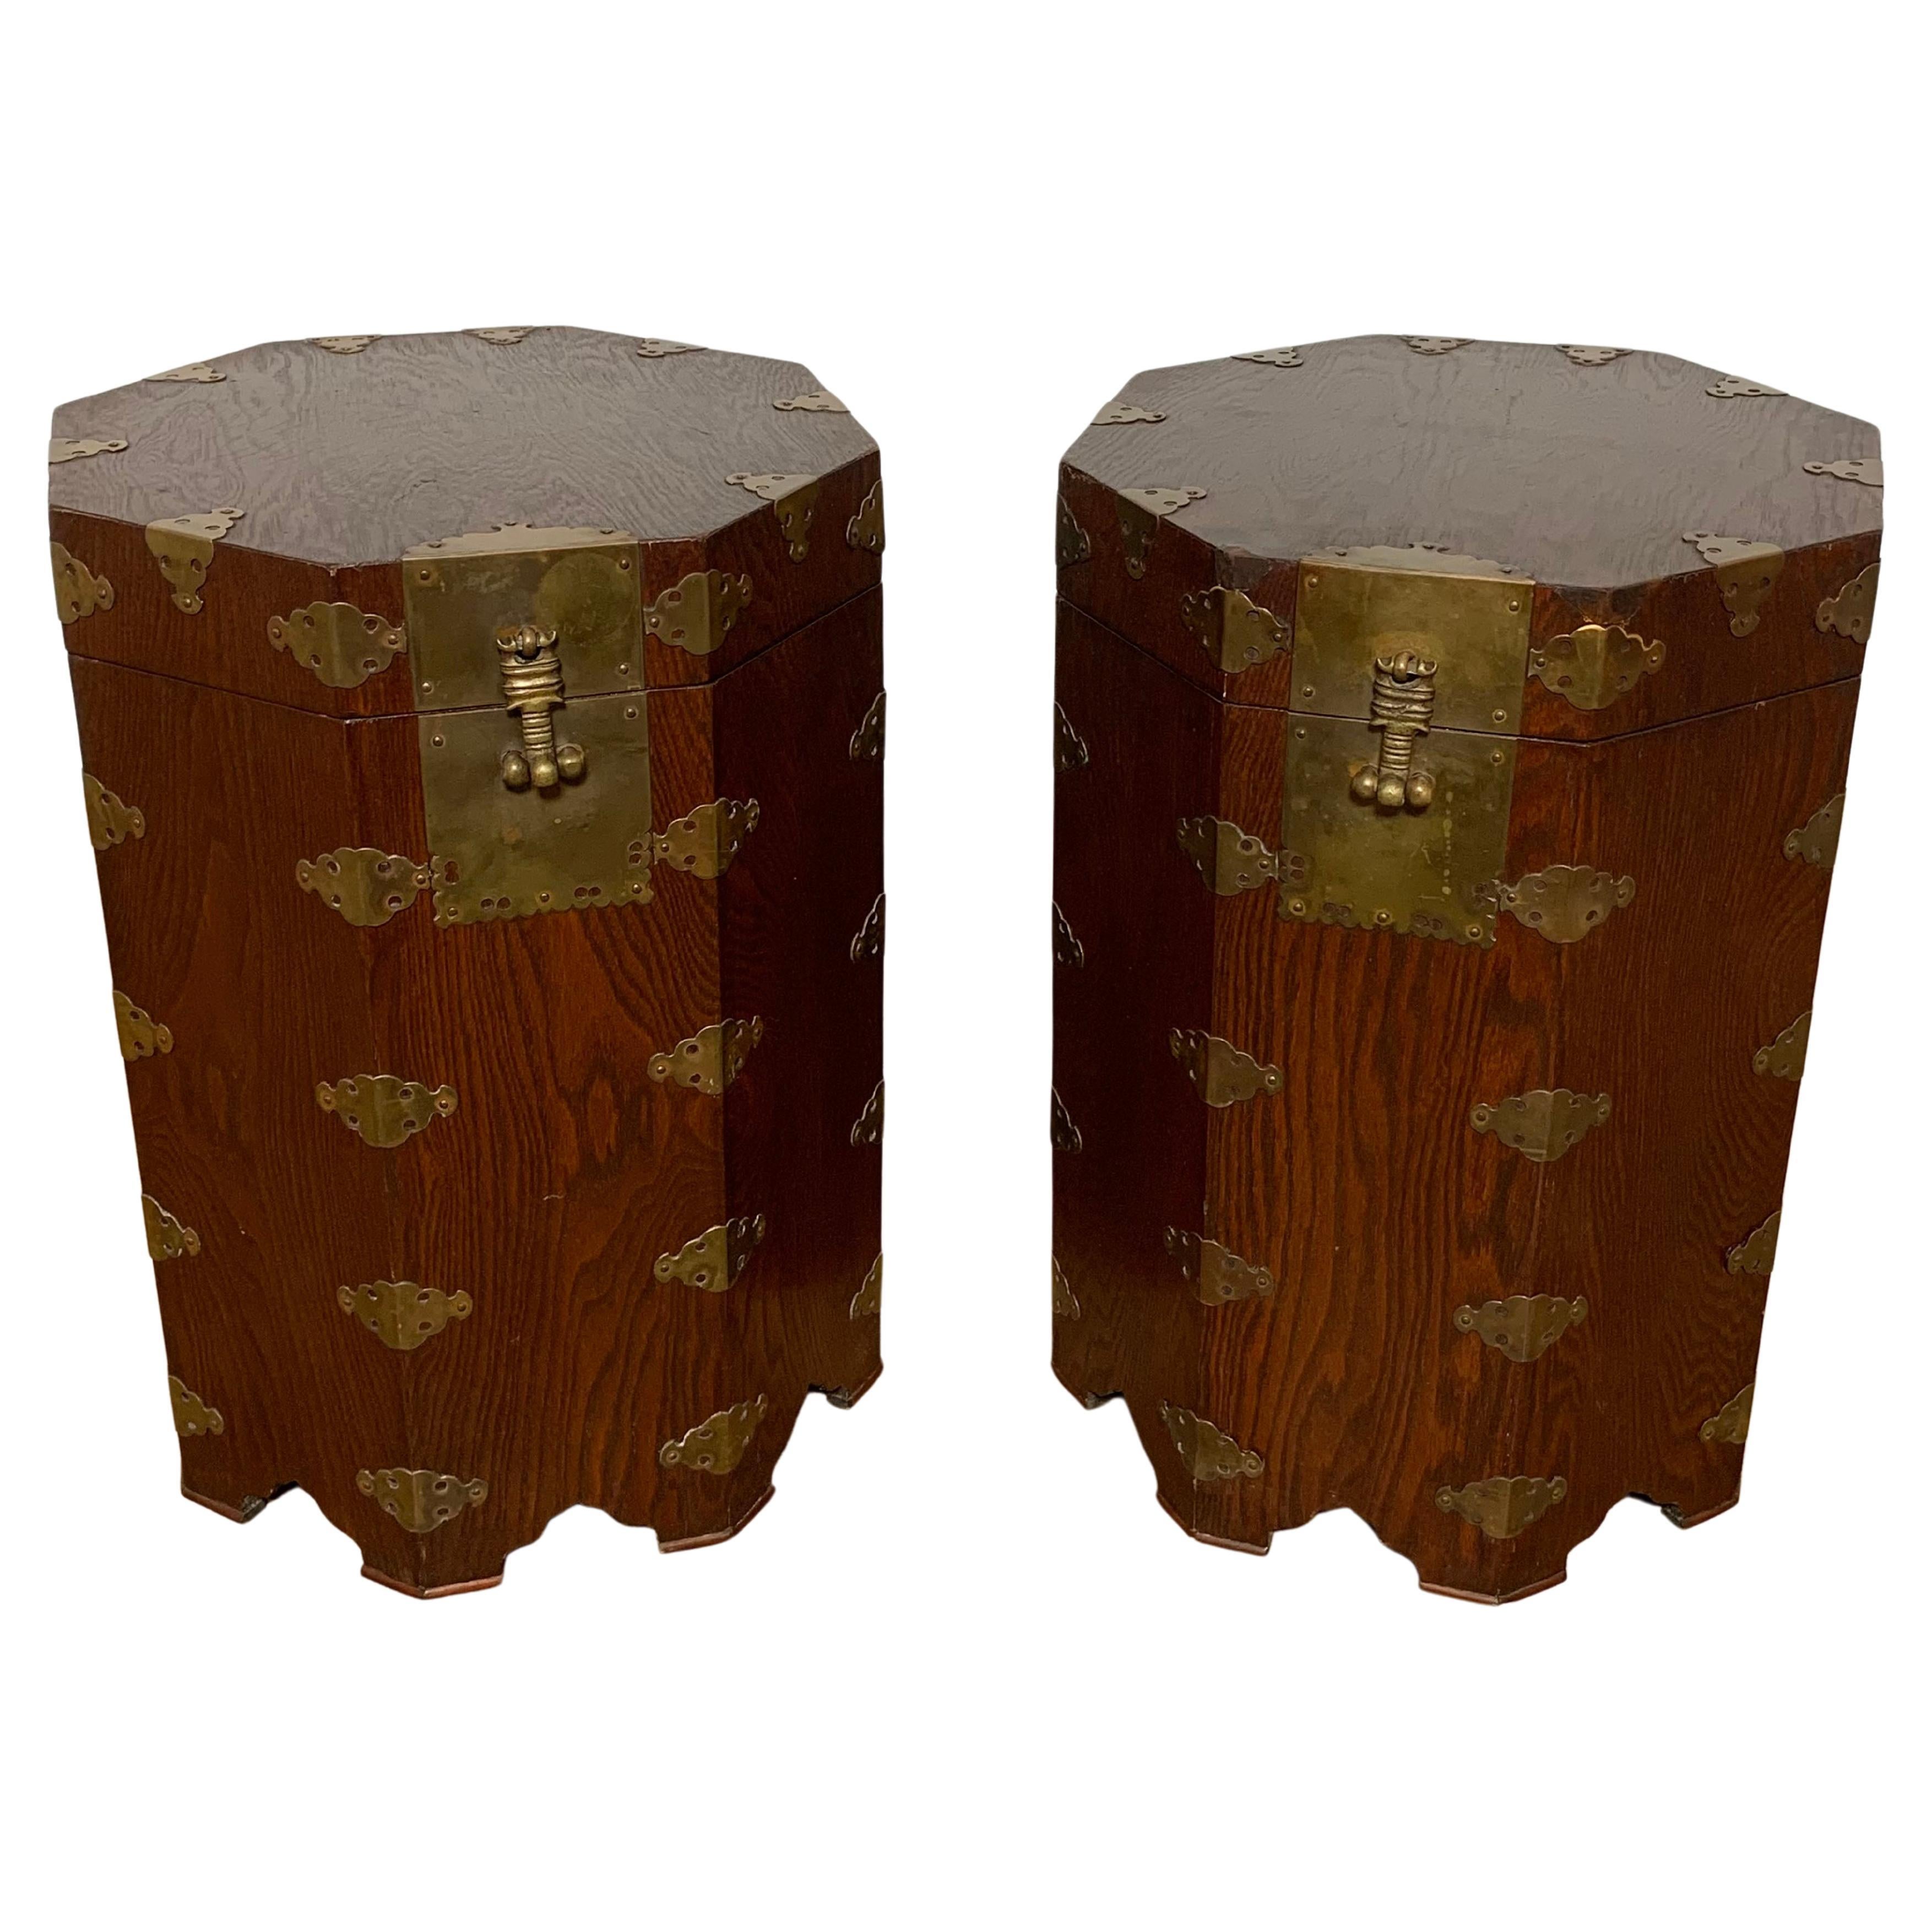 Pair of Asian Campaign Style Octagonal Lidded Chests Circa 1950s